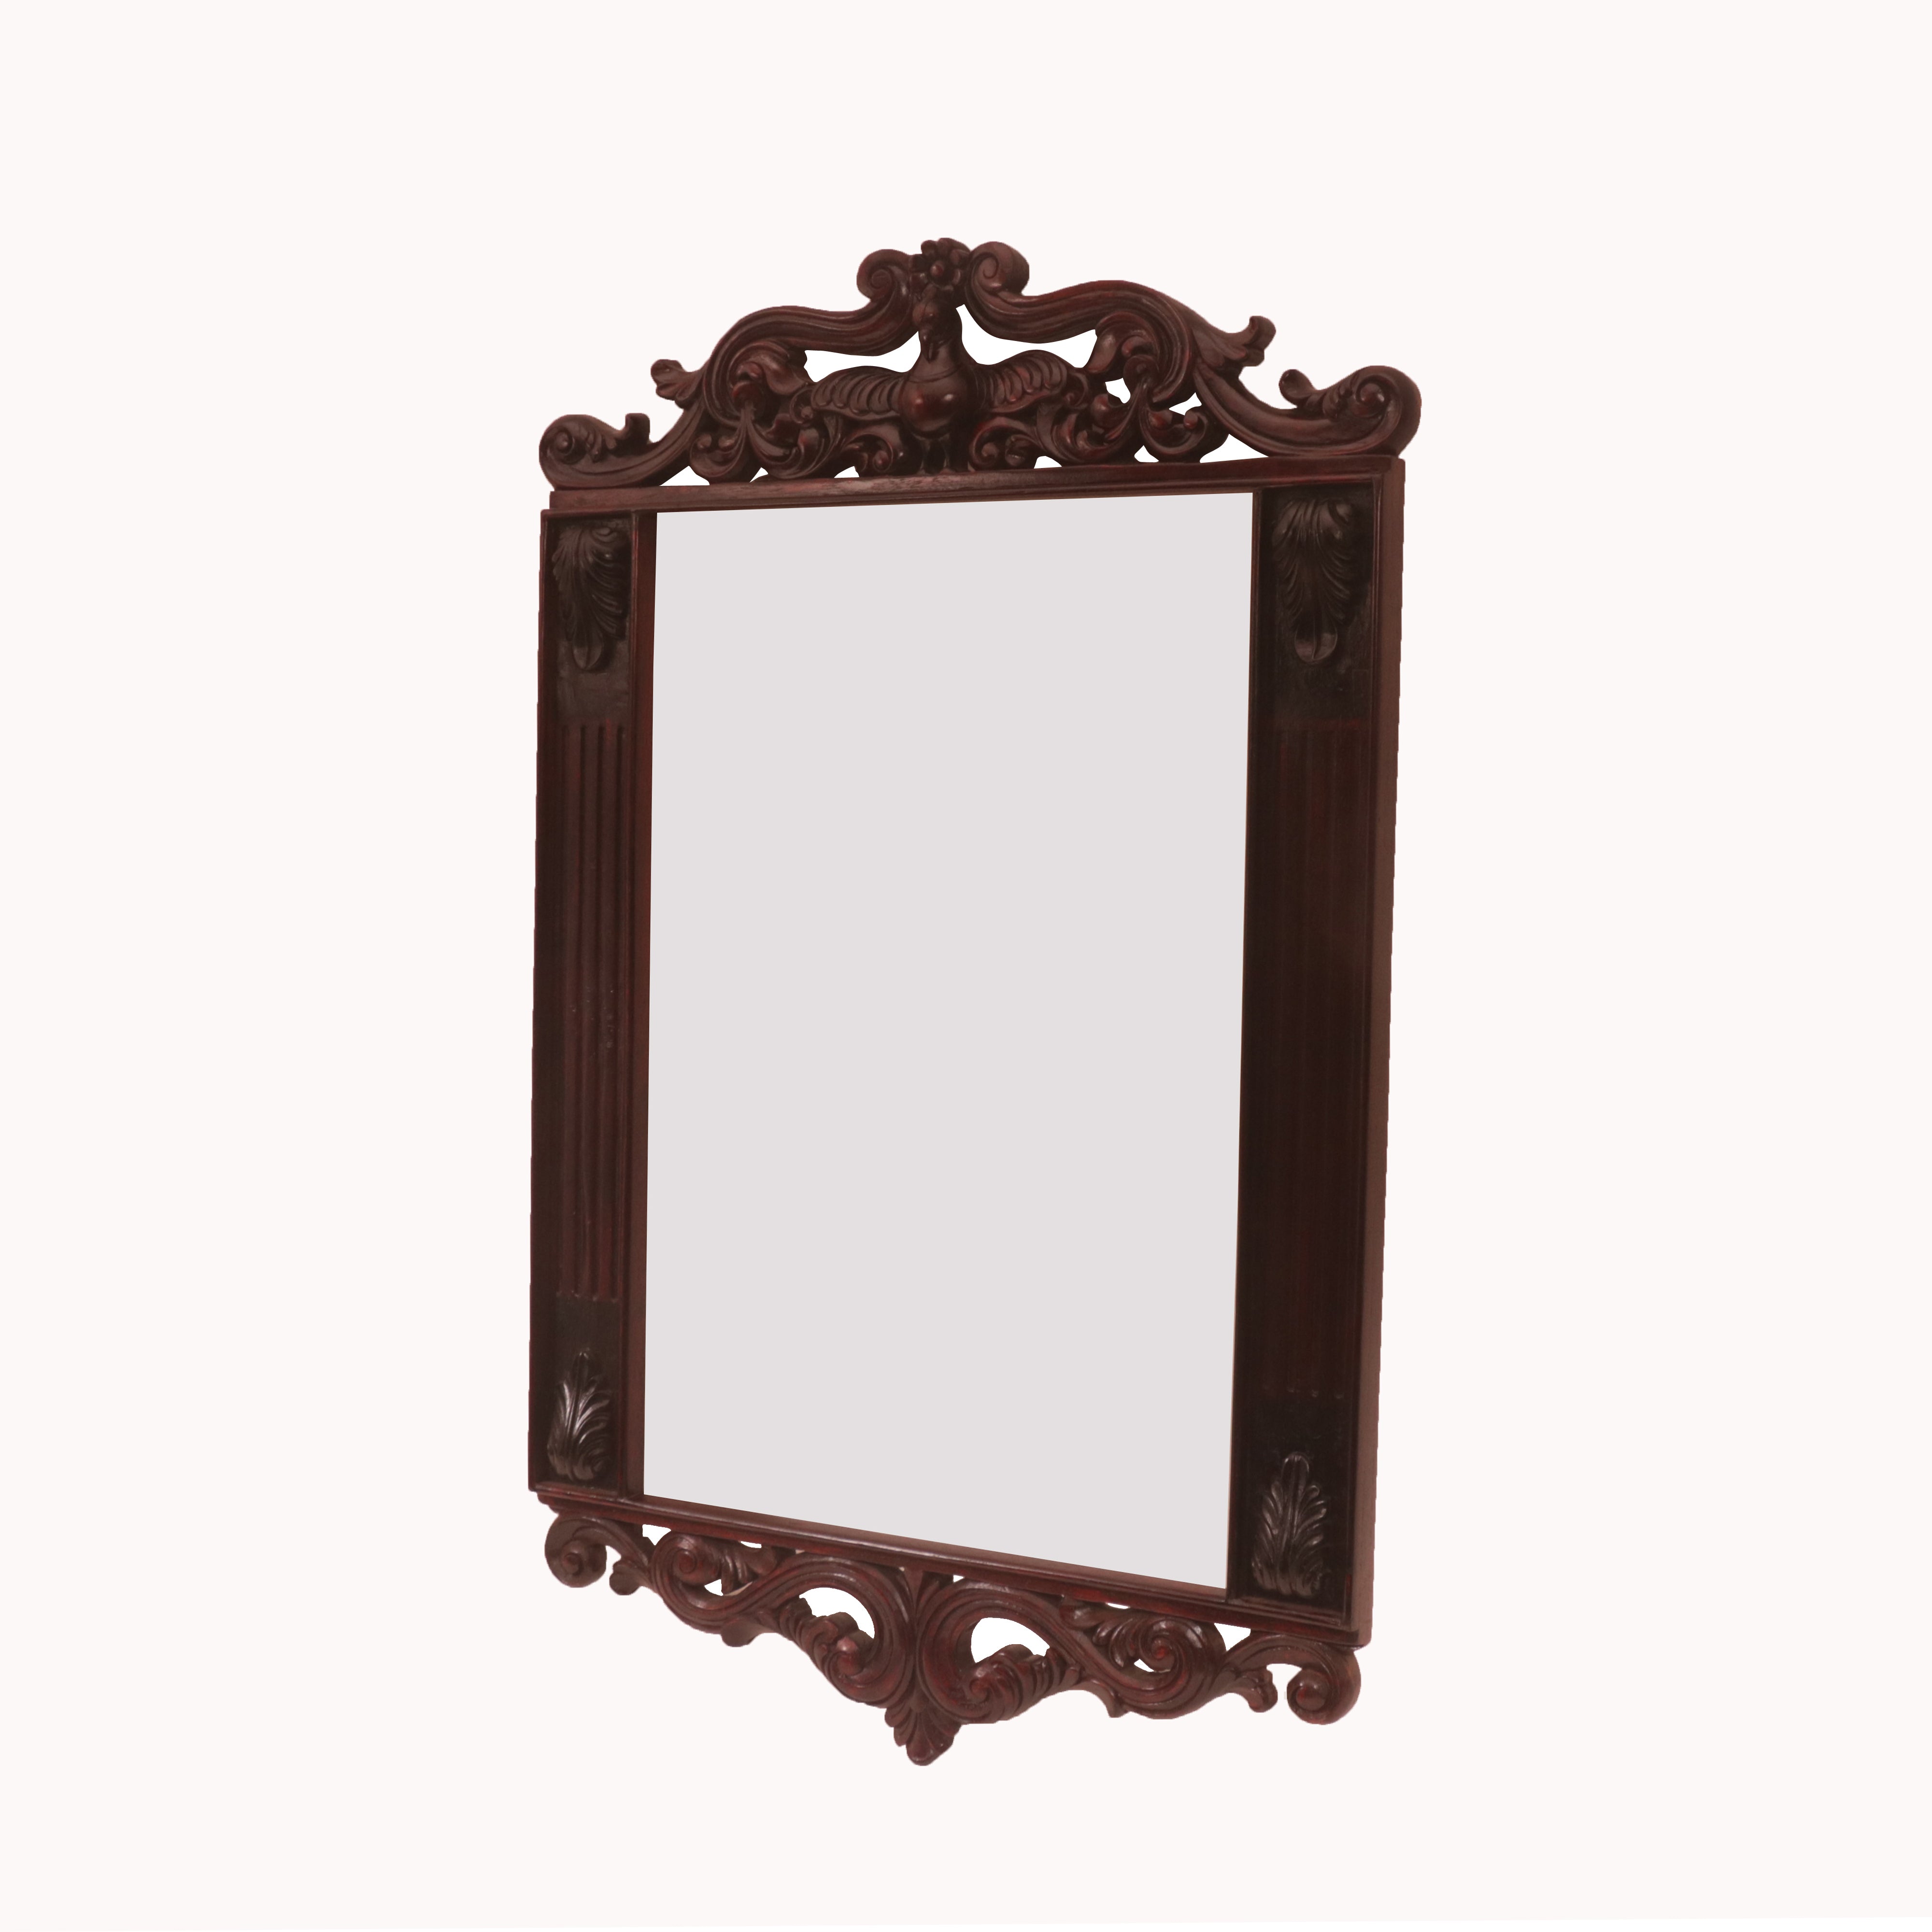 Ornate Carved and Polished Mirror Mirror